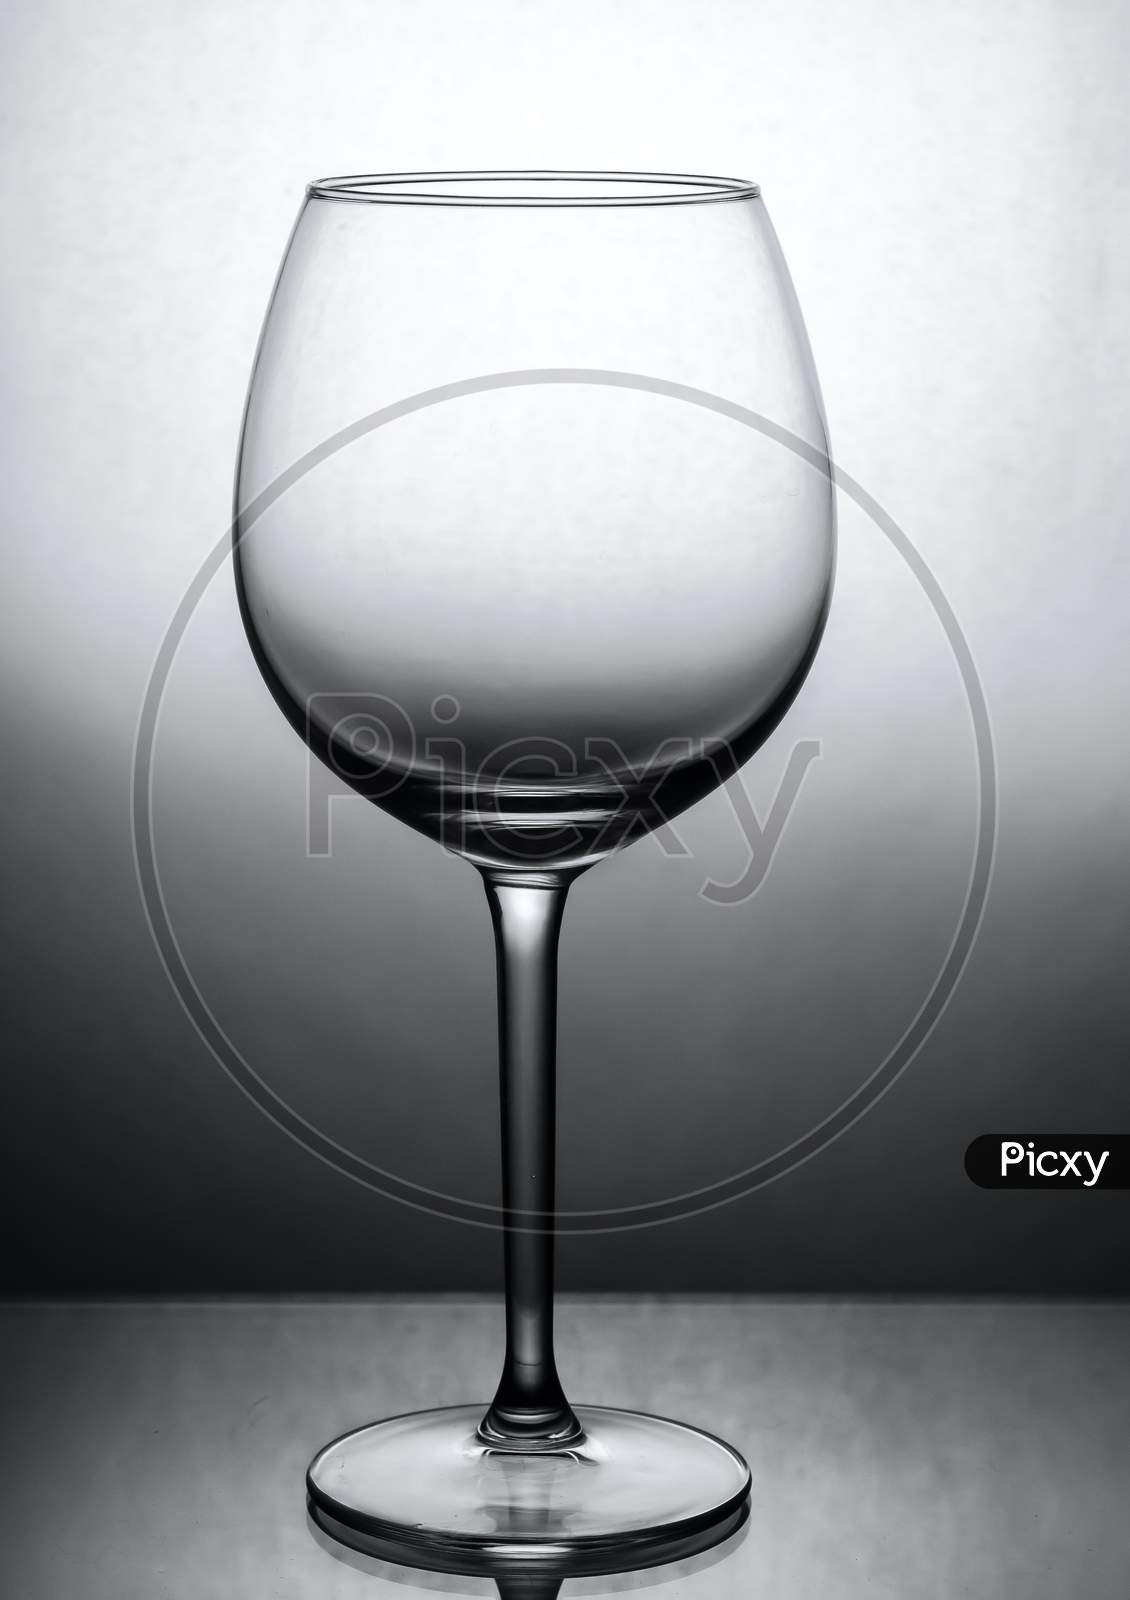 An empty glass lying on the table